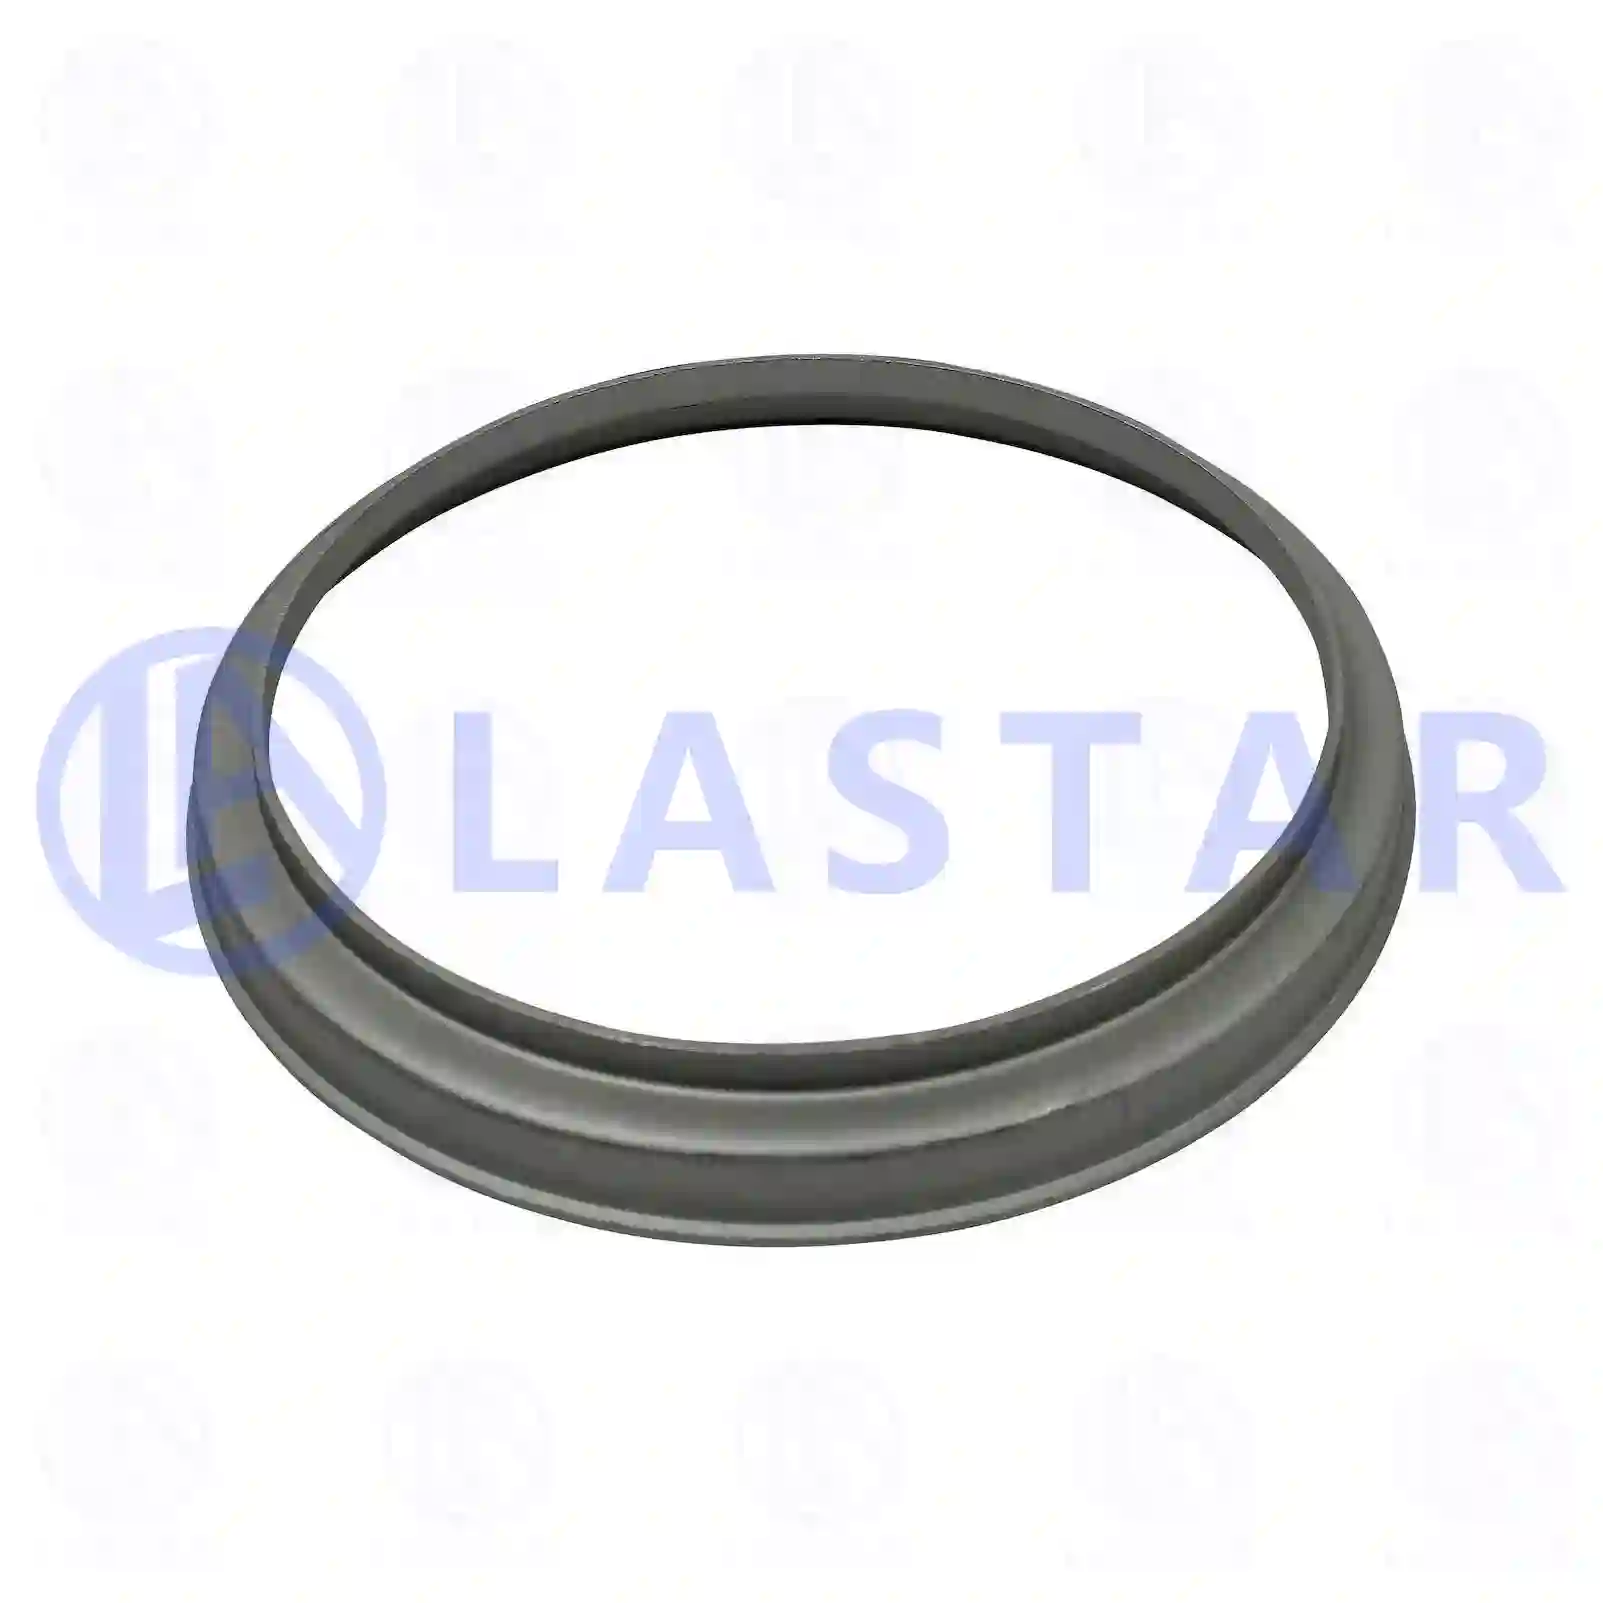 Spacer ring, 77726287, 9453340351 ||  77726287 Lastar Spare Part | Truck Spare Parts, Auotomotive Spare Parts Spacer ring, 77726287, 9453340351 ||  77726287 Lastar Spare Part | Truck Spare Parts, Auotomotive Spare Parts